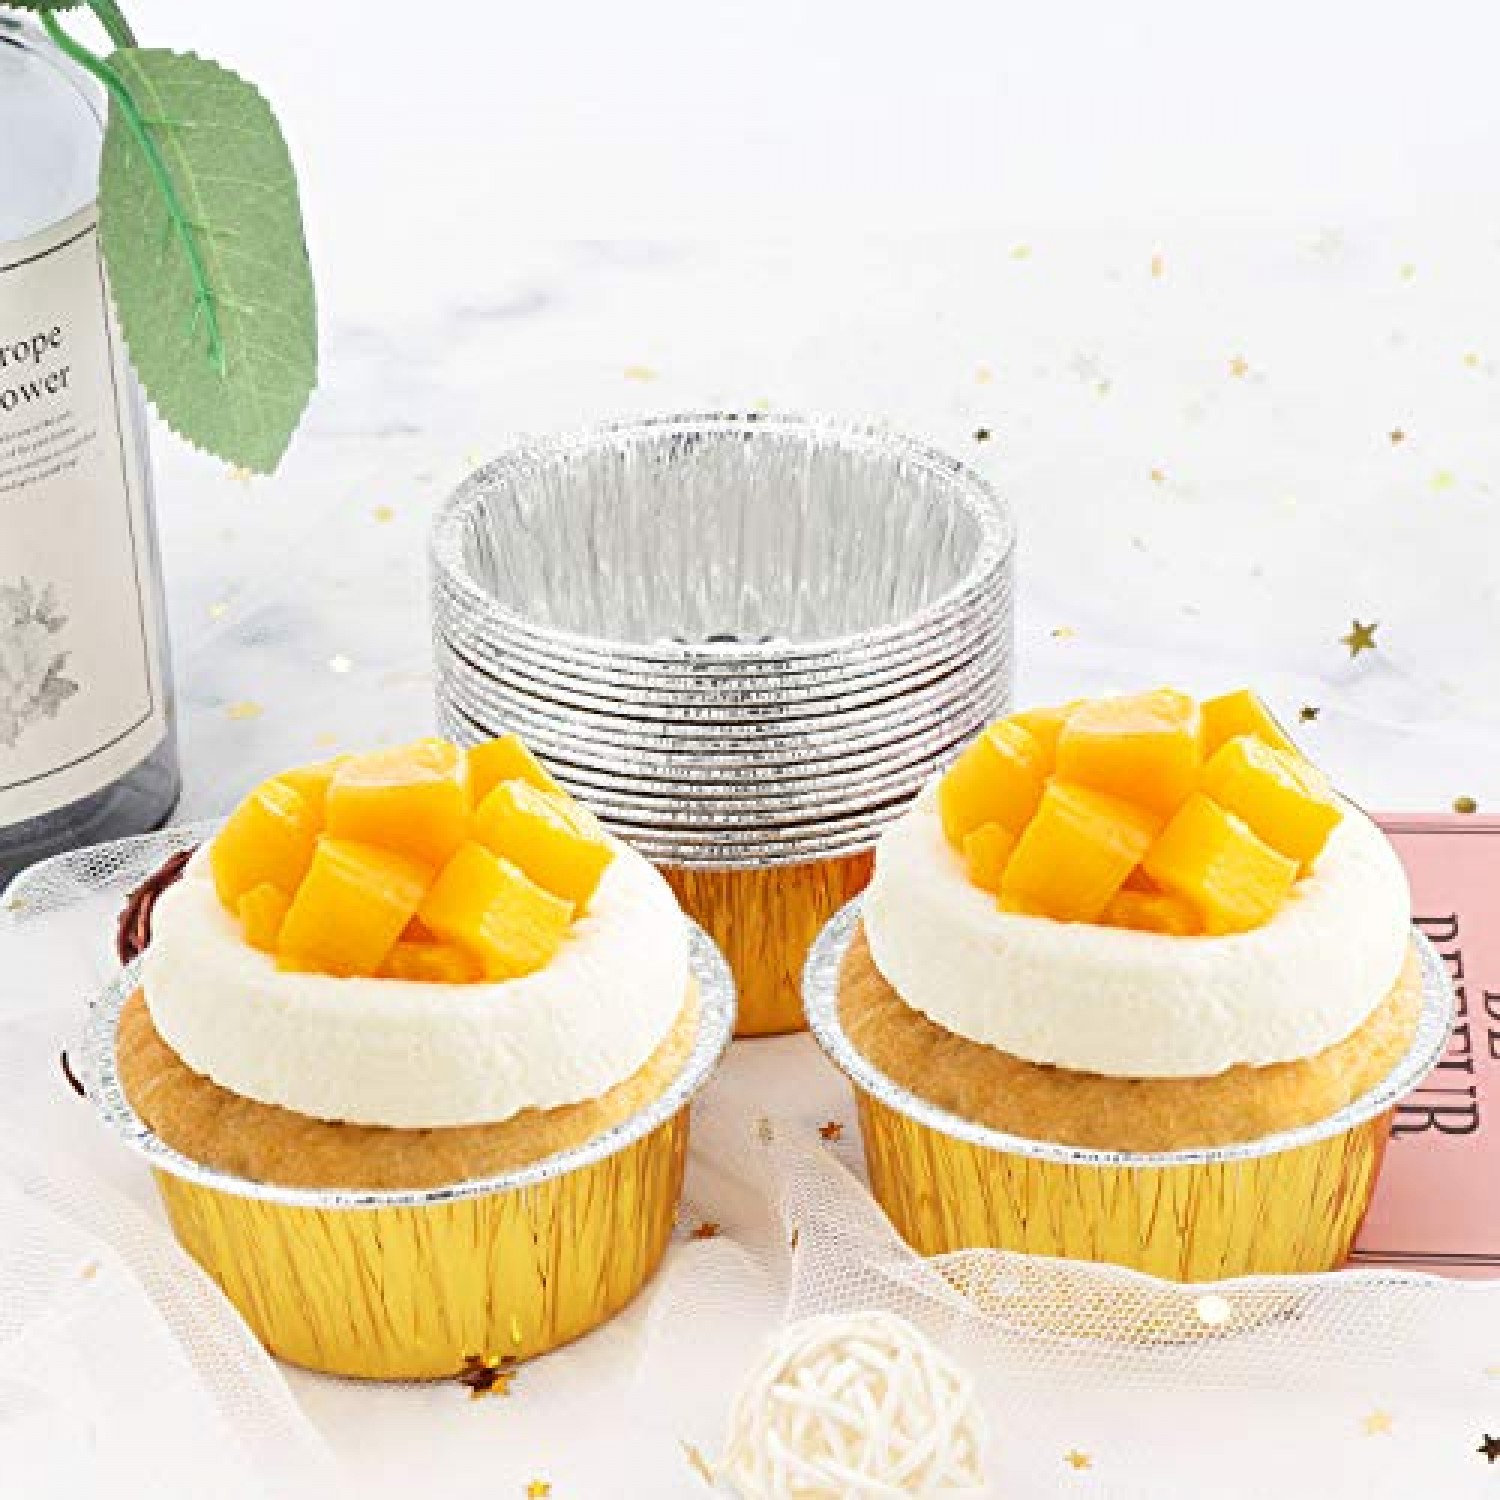 100pcs 5oz Aluminum Muffin Cups with Lid, Muffin Liners Cups with Lids,  Disposable Foil Ramekins, Aluminum Cupcake liners, Creme Brulee Ramekins,  Aluminum Foil Cupcake Baking Cups Holders Pans